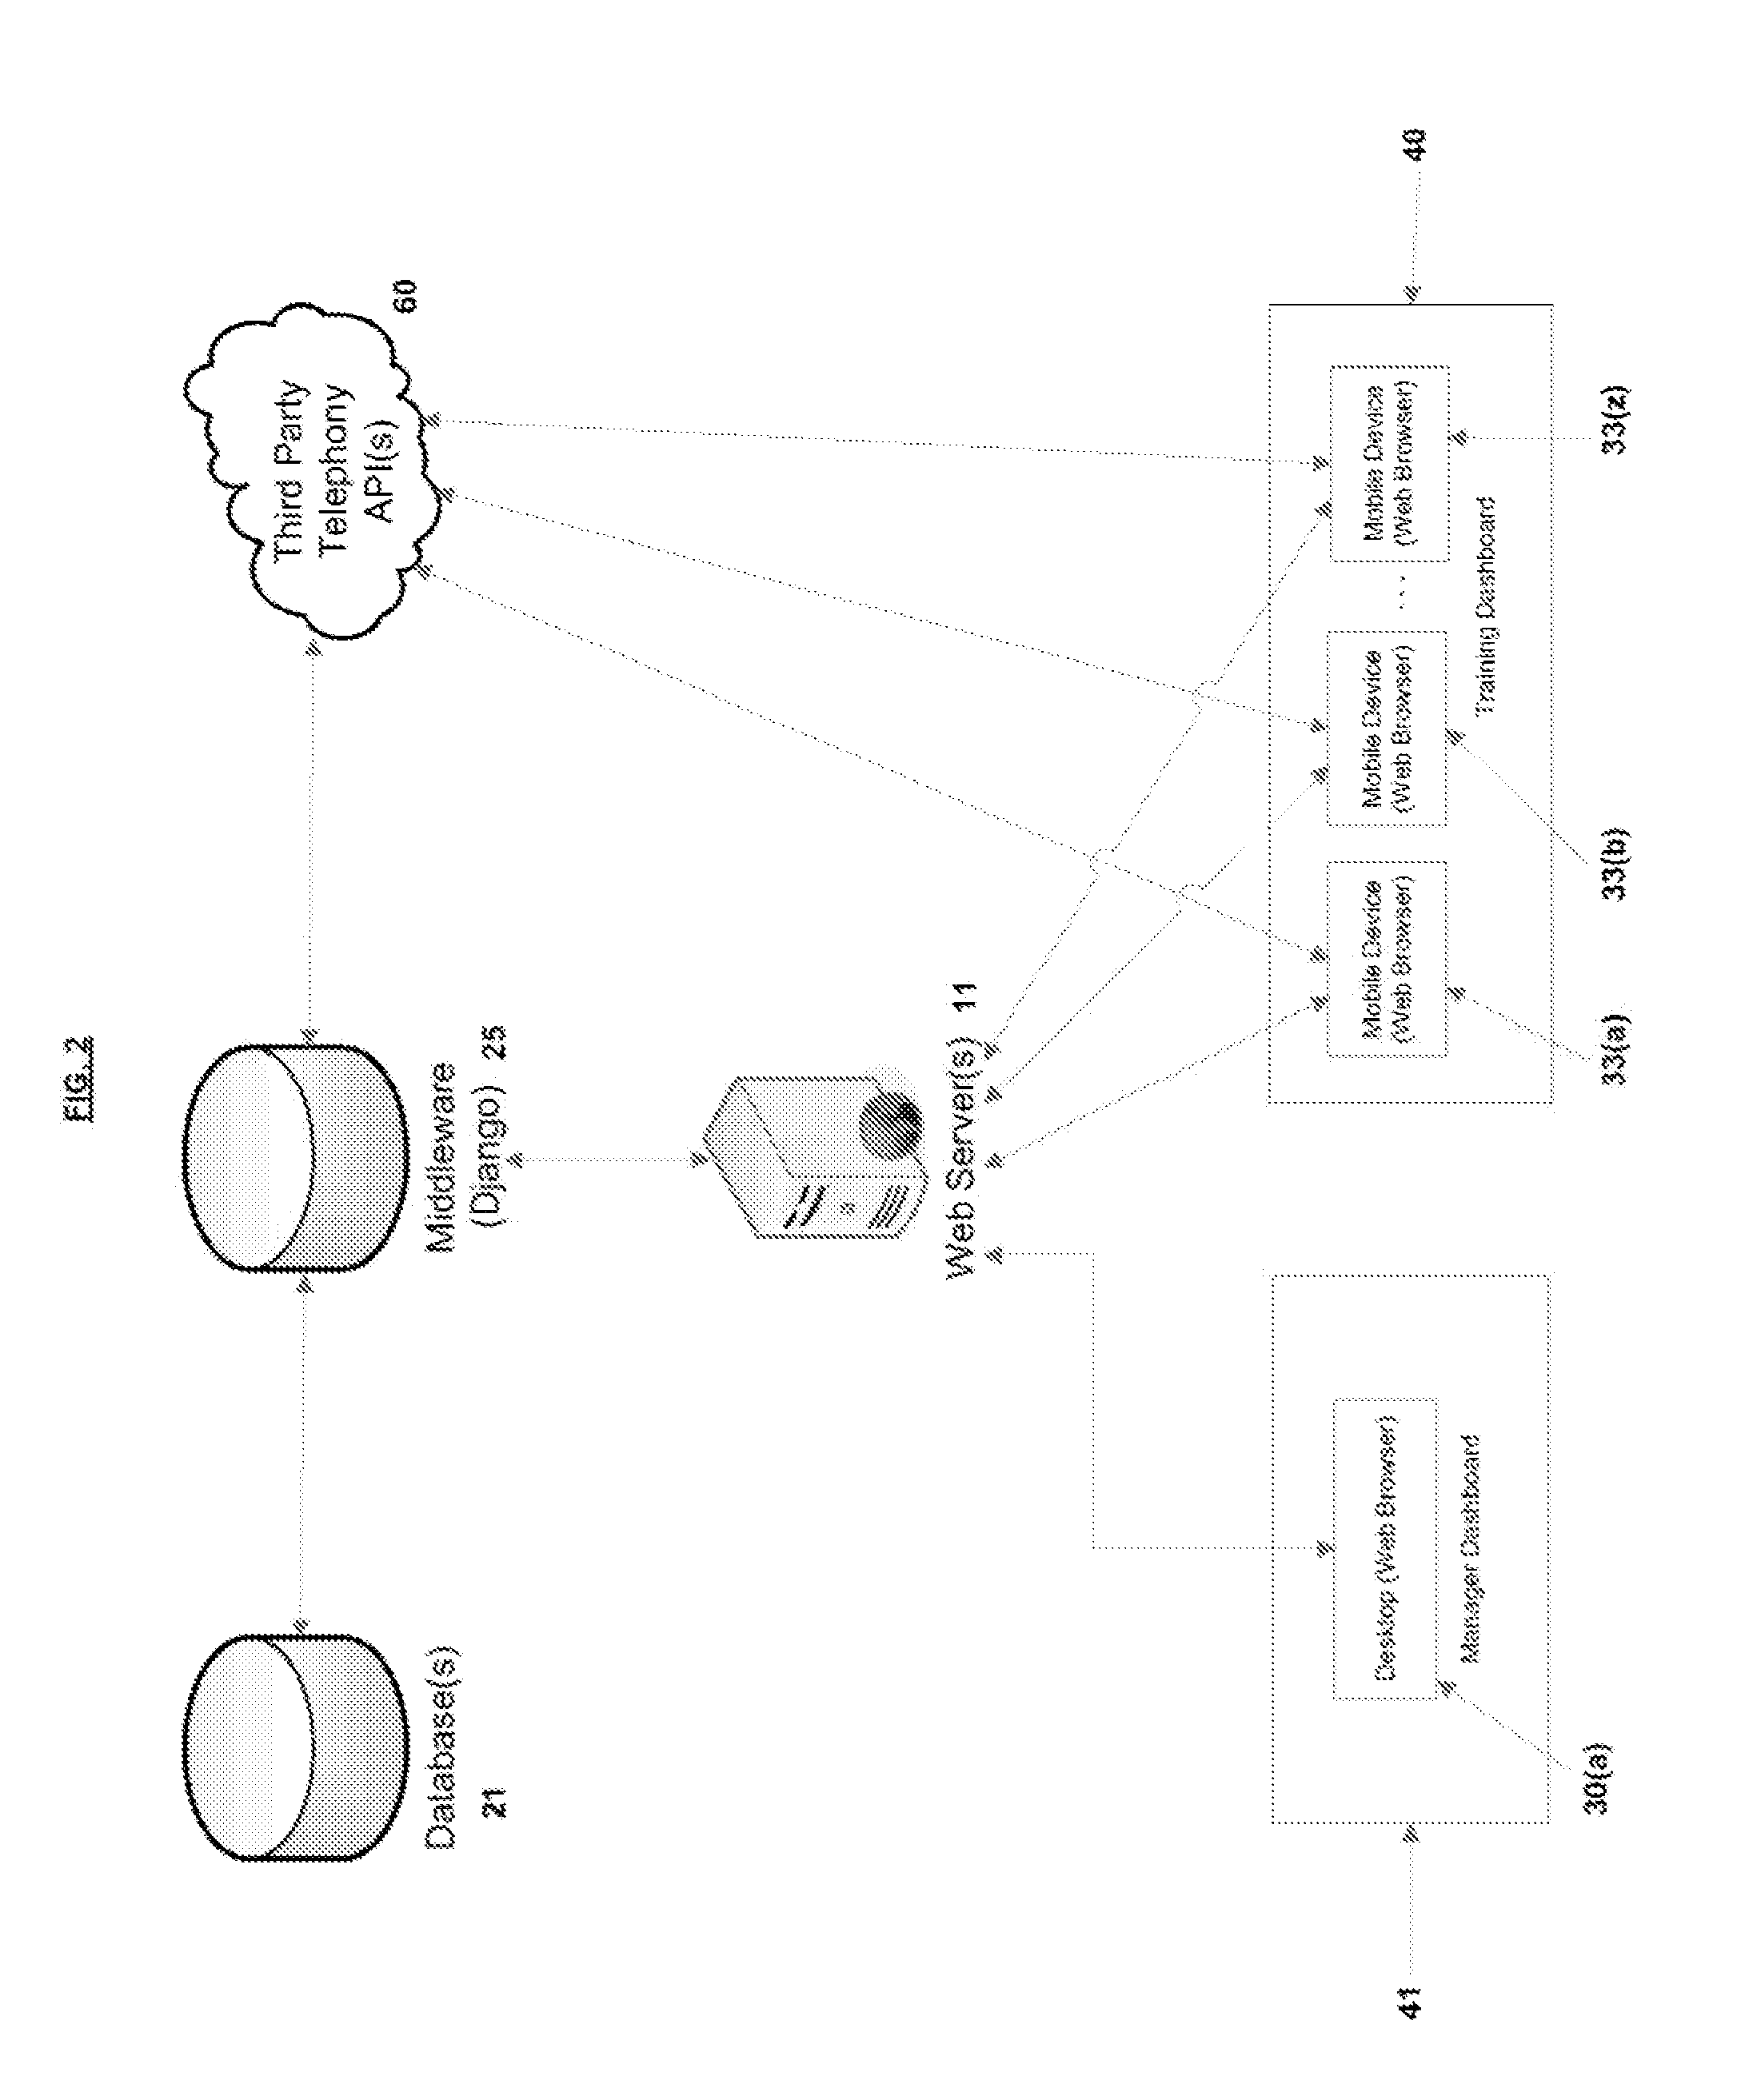 Systems and methods for providing training and collaborative activities through a group-based training and evaluation platform